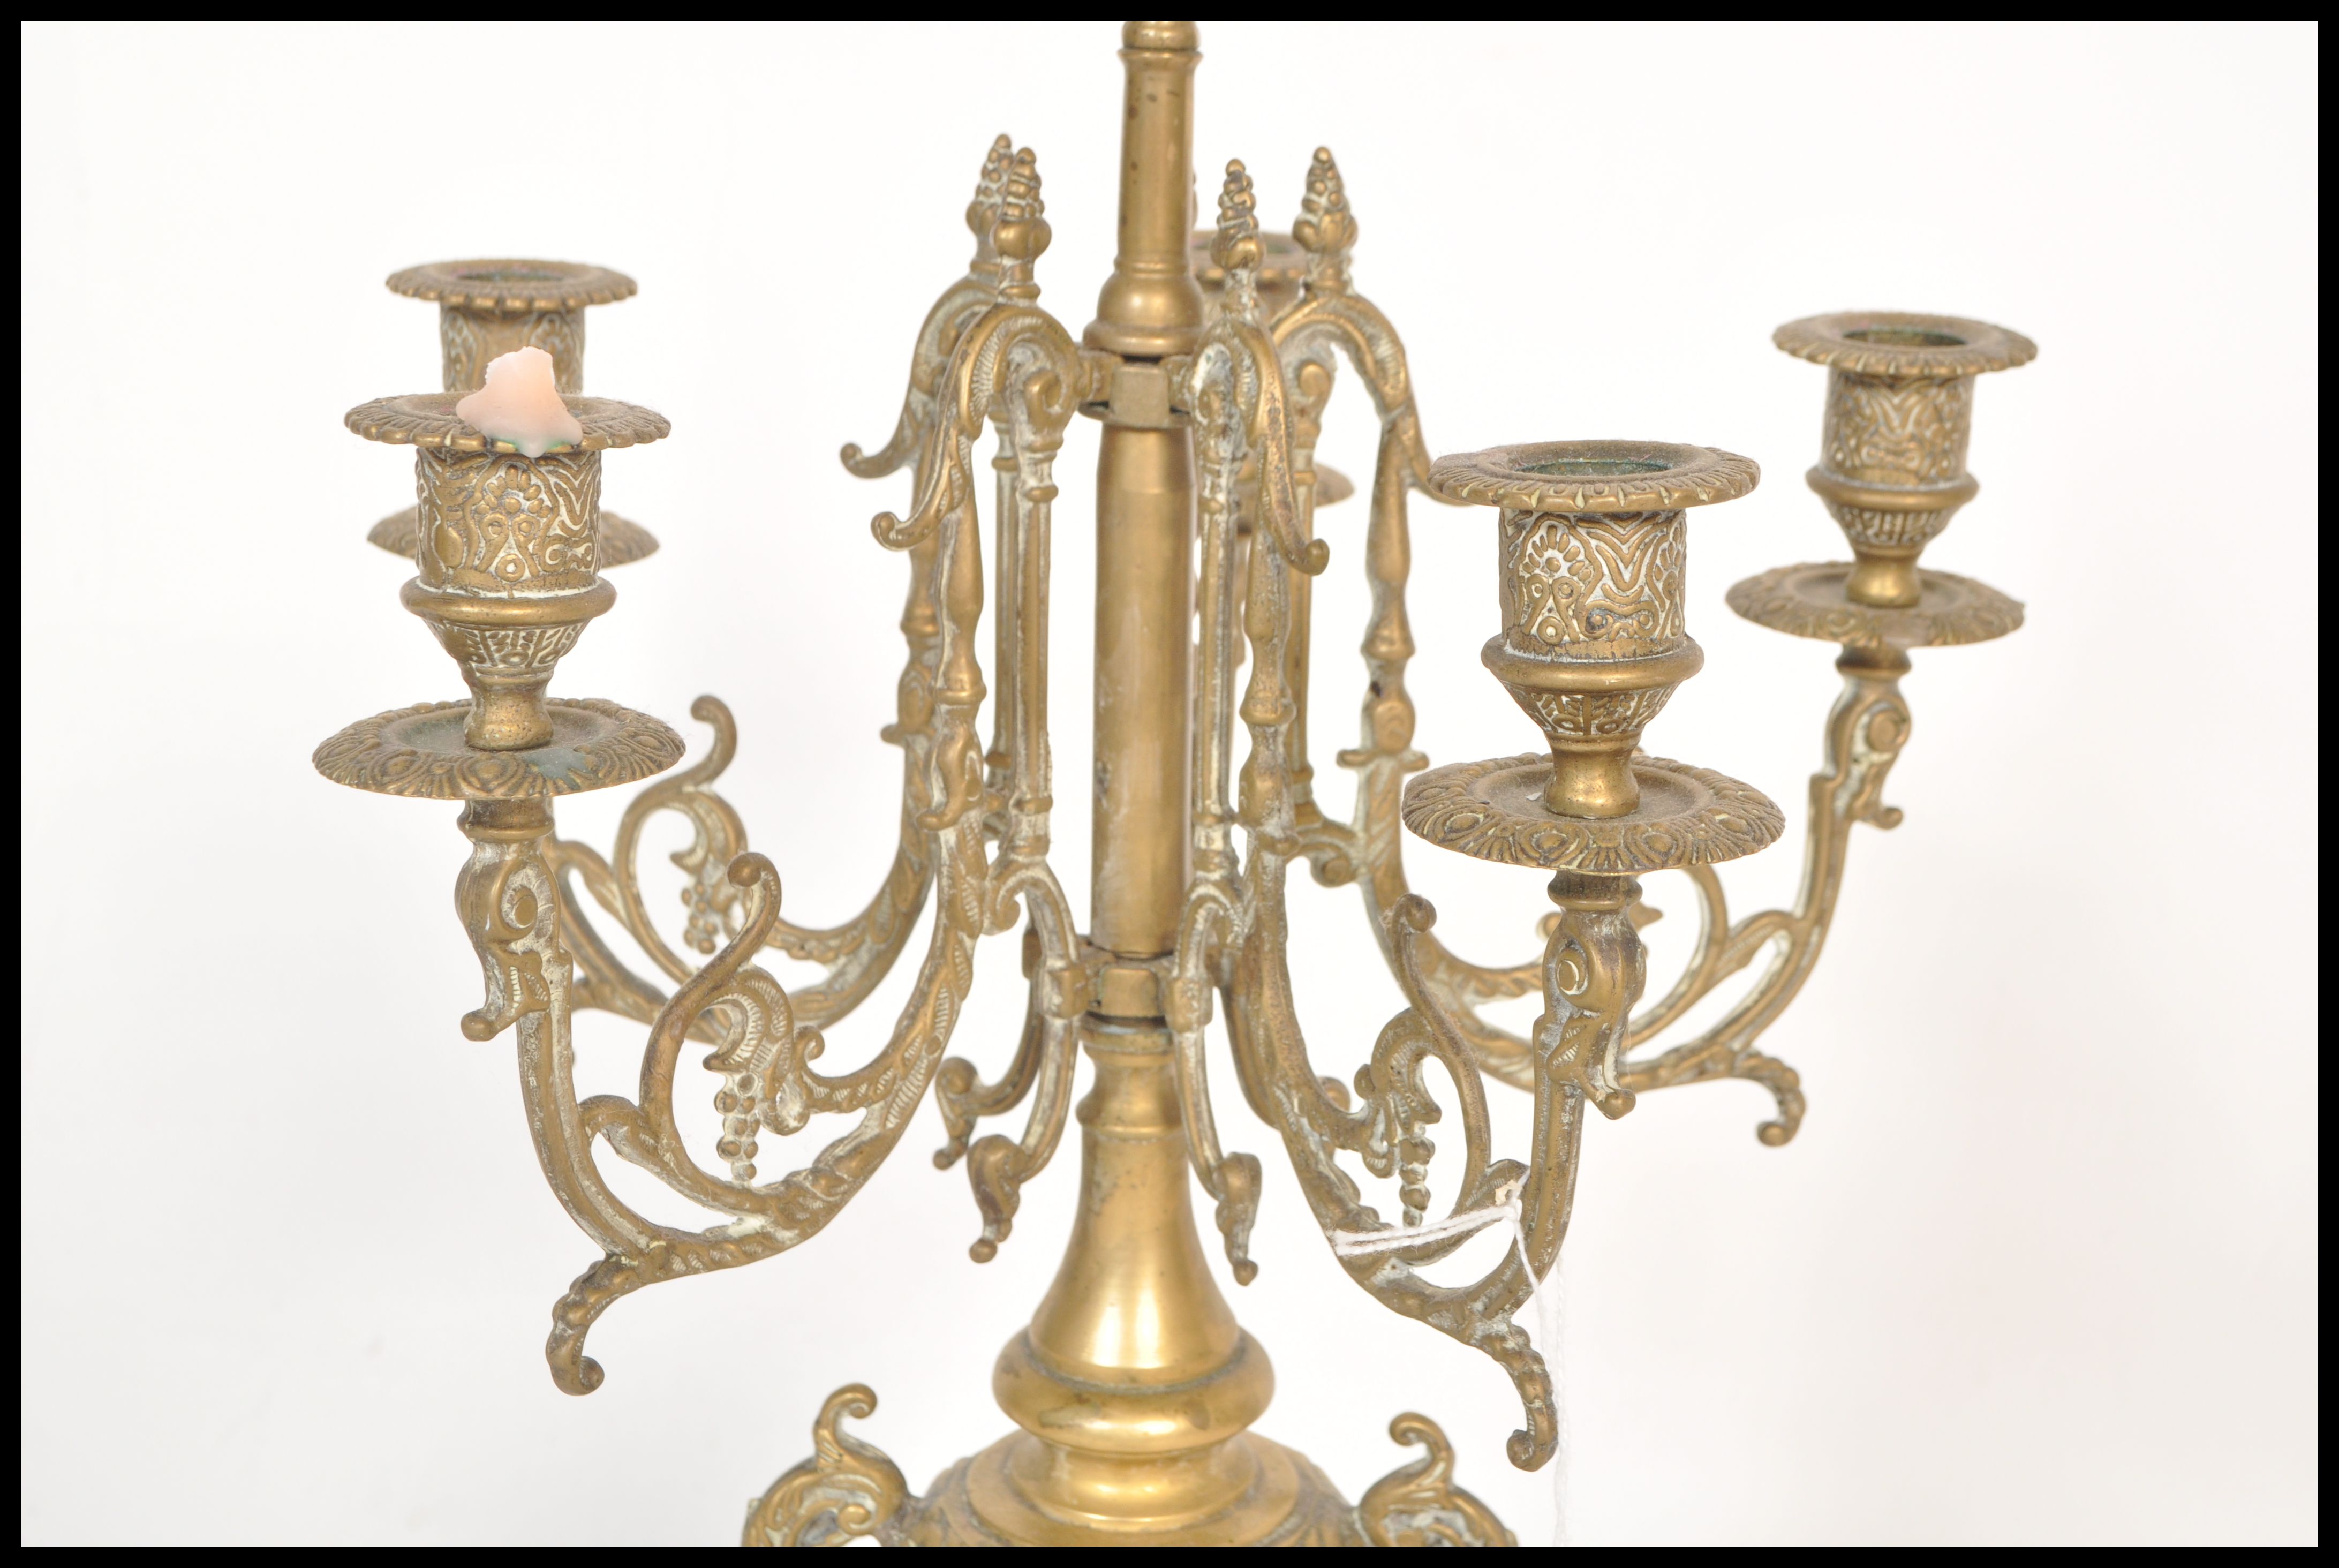 A 19th century, French large rococo revival brass gilt table five point candelabra centrepiece, - Image 4 of 6